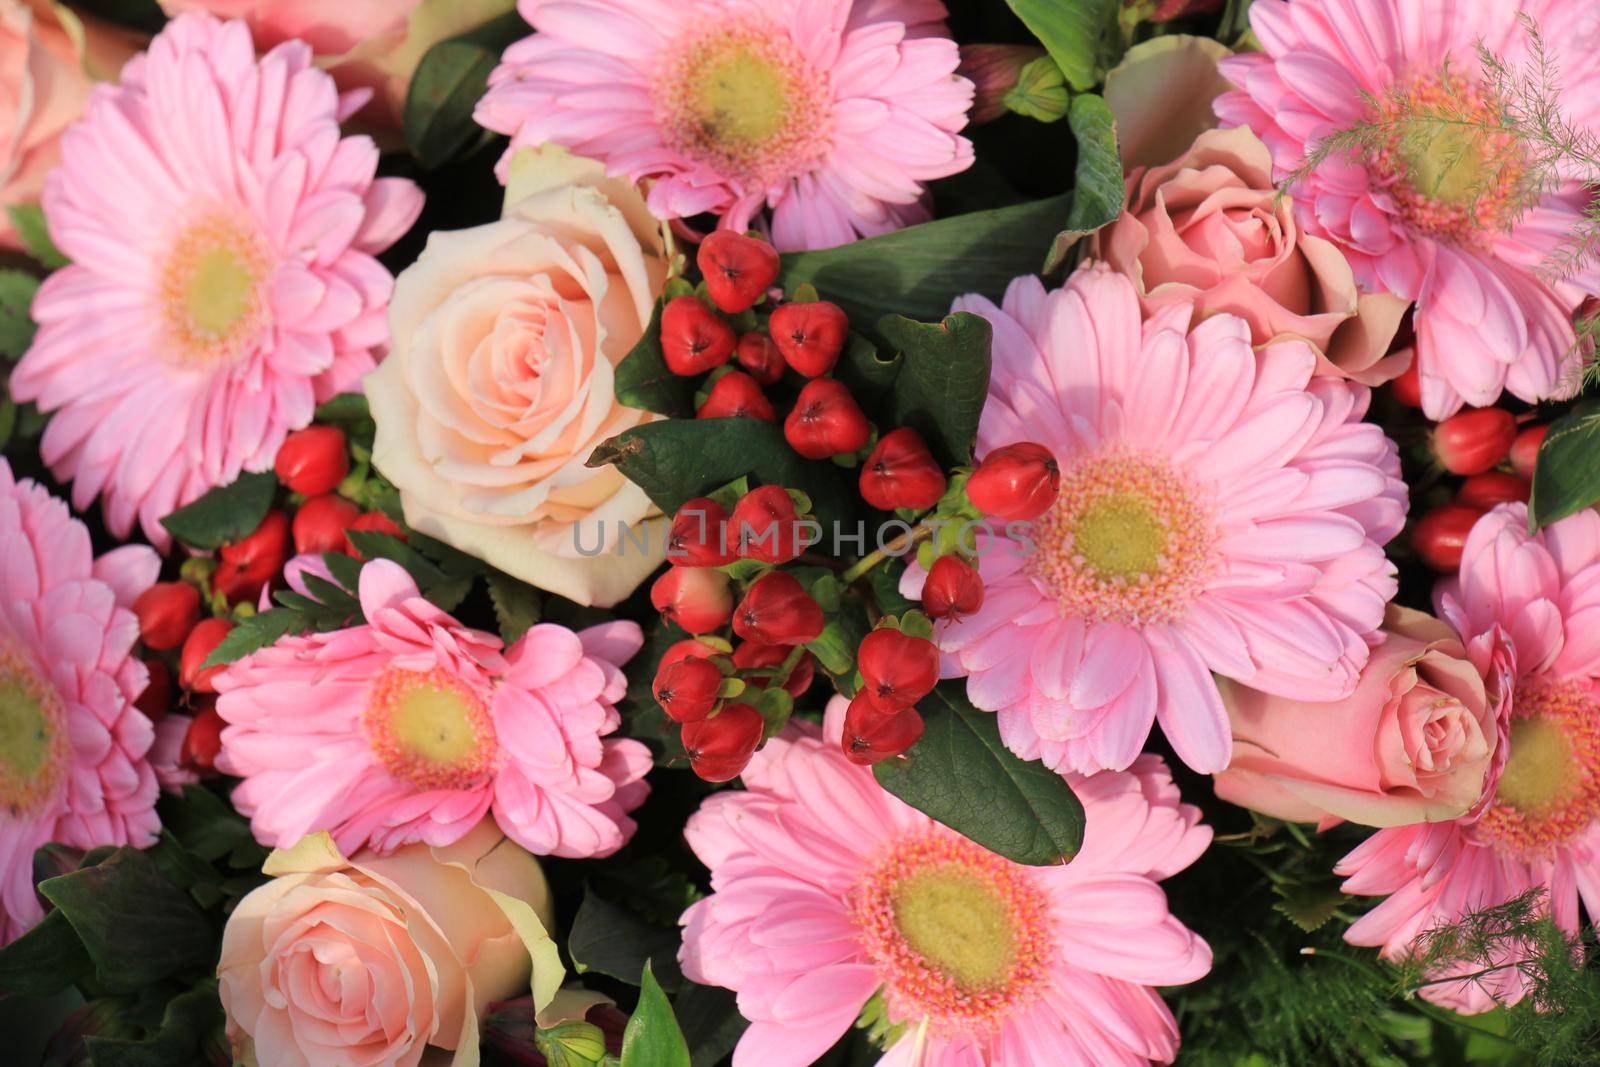 Mixed pink flowers in a floral wedding decoration by studioportosabbia